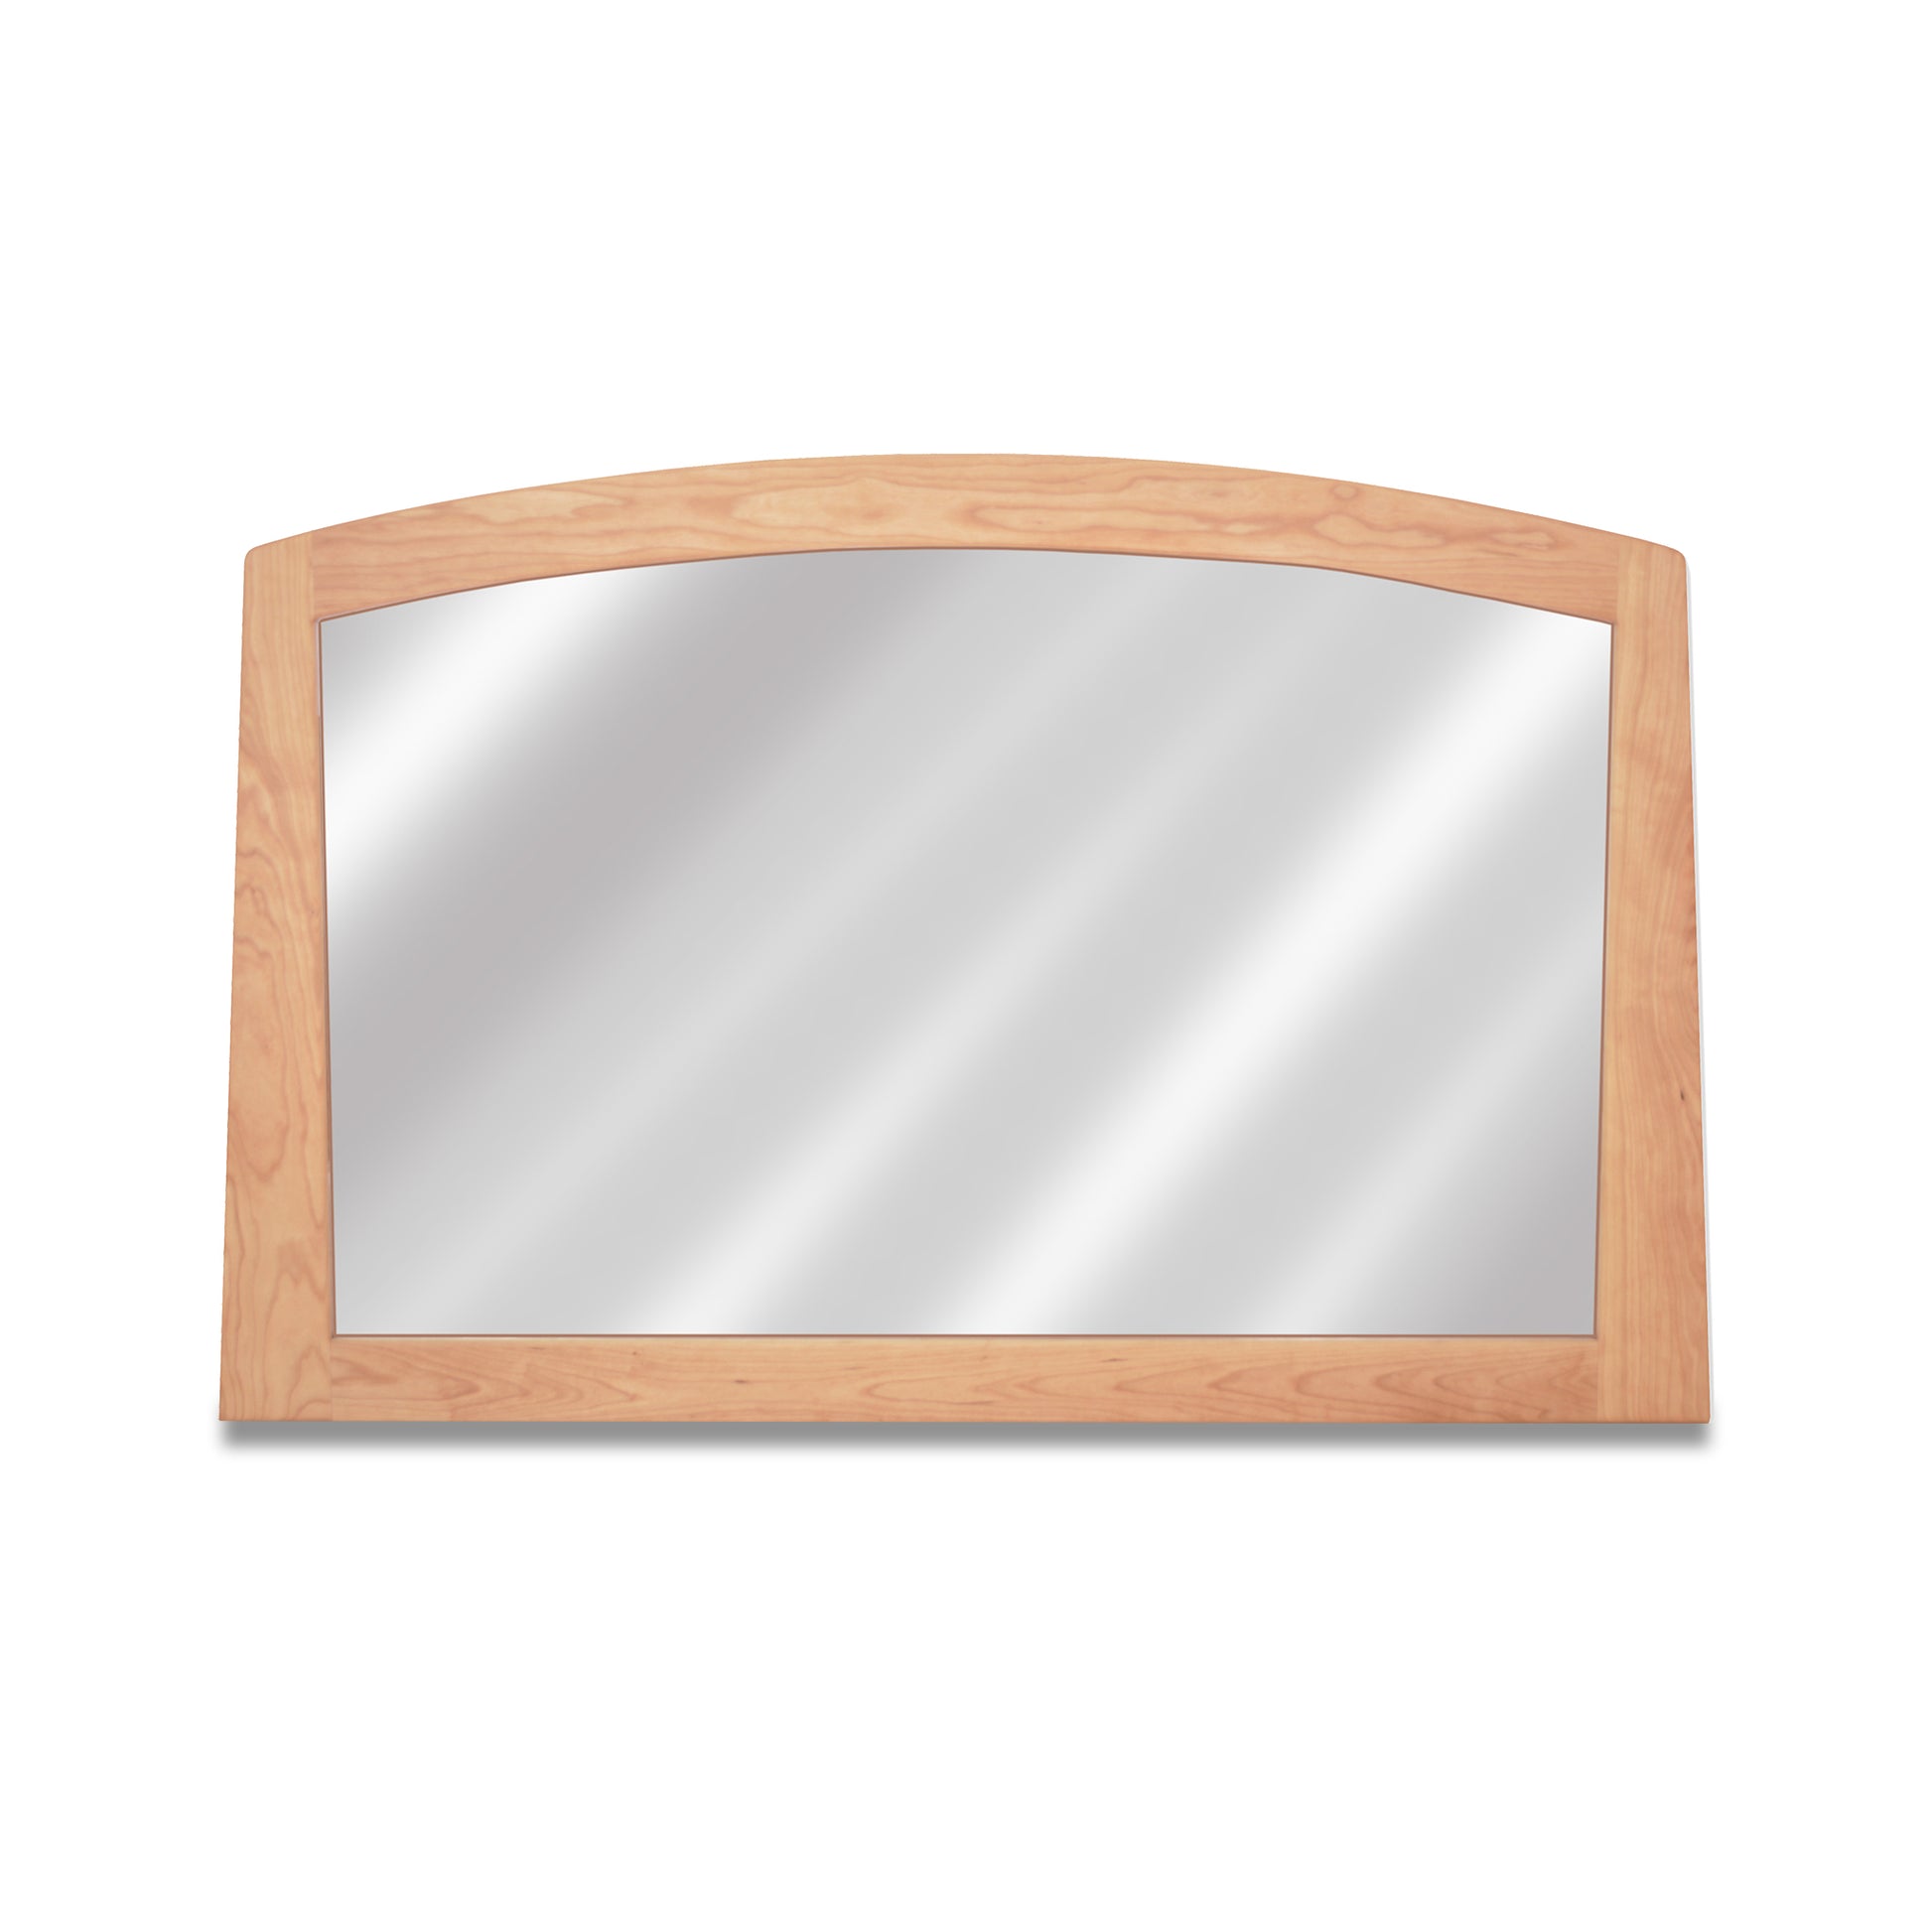 A Cherry Moon Horizontal Mirror with a hardwood frame on a white background, made by Maple Corner Woodworks.